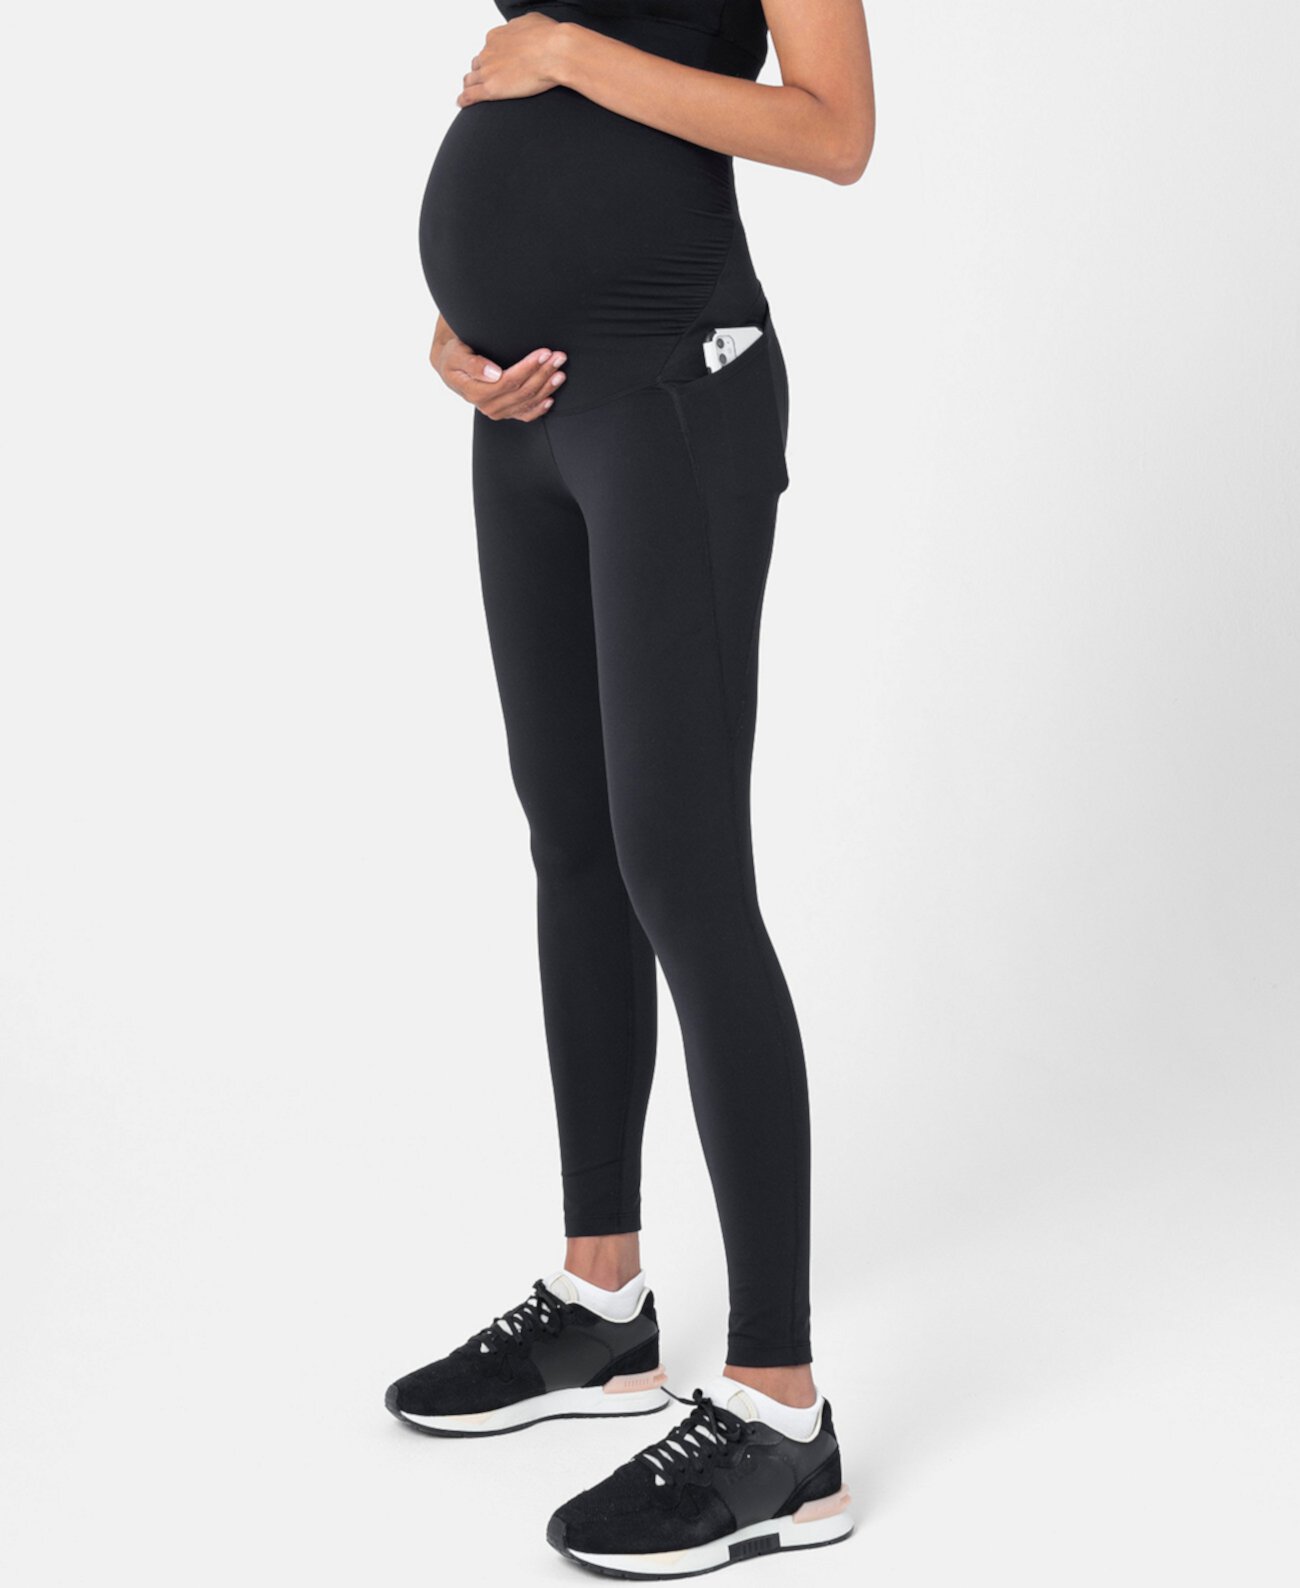 Women's Active Support Soft-Touch Sage Maternity Leggings Seraphine